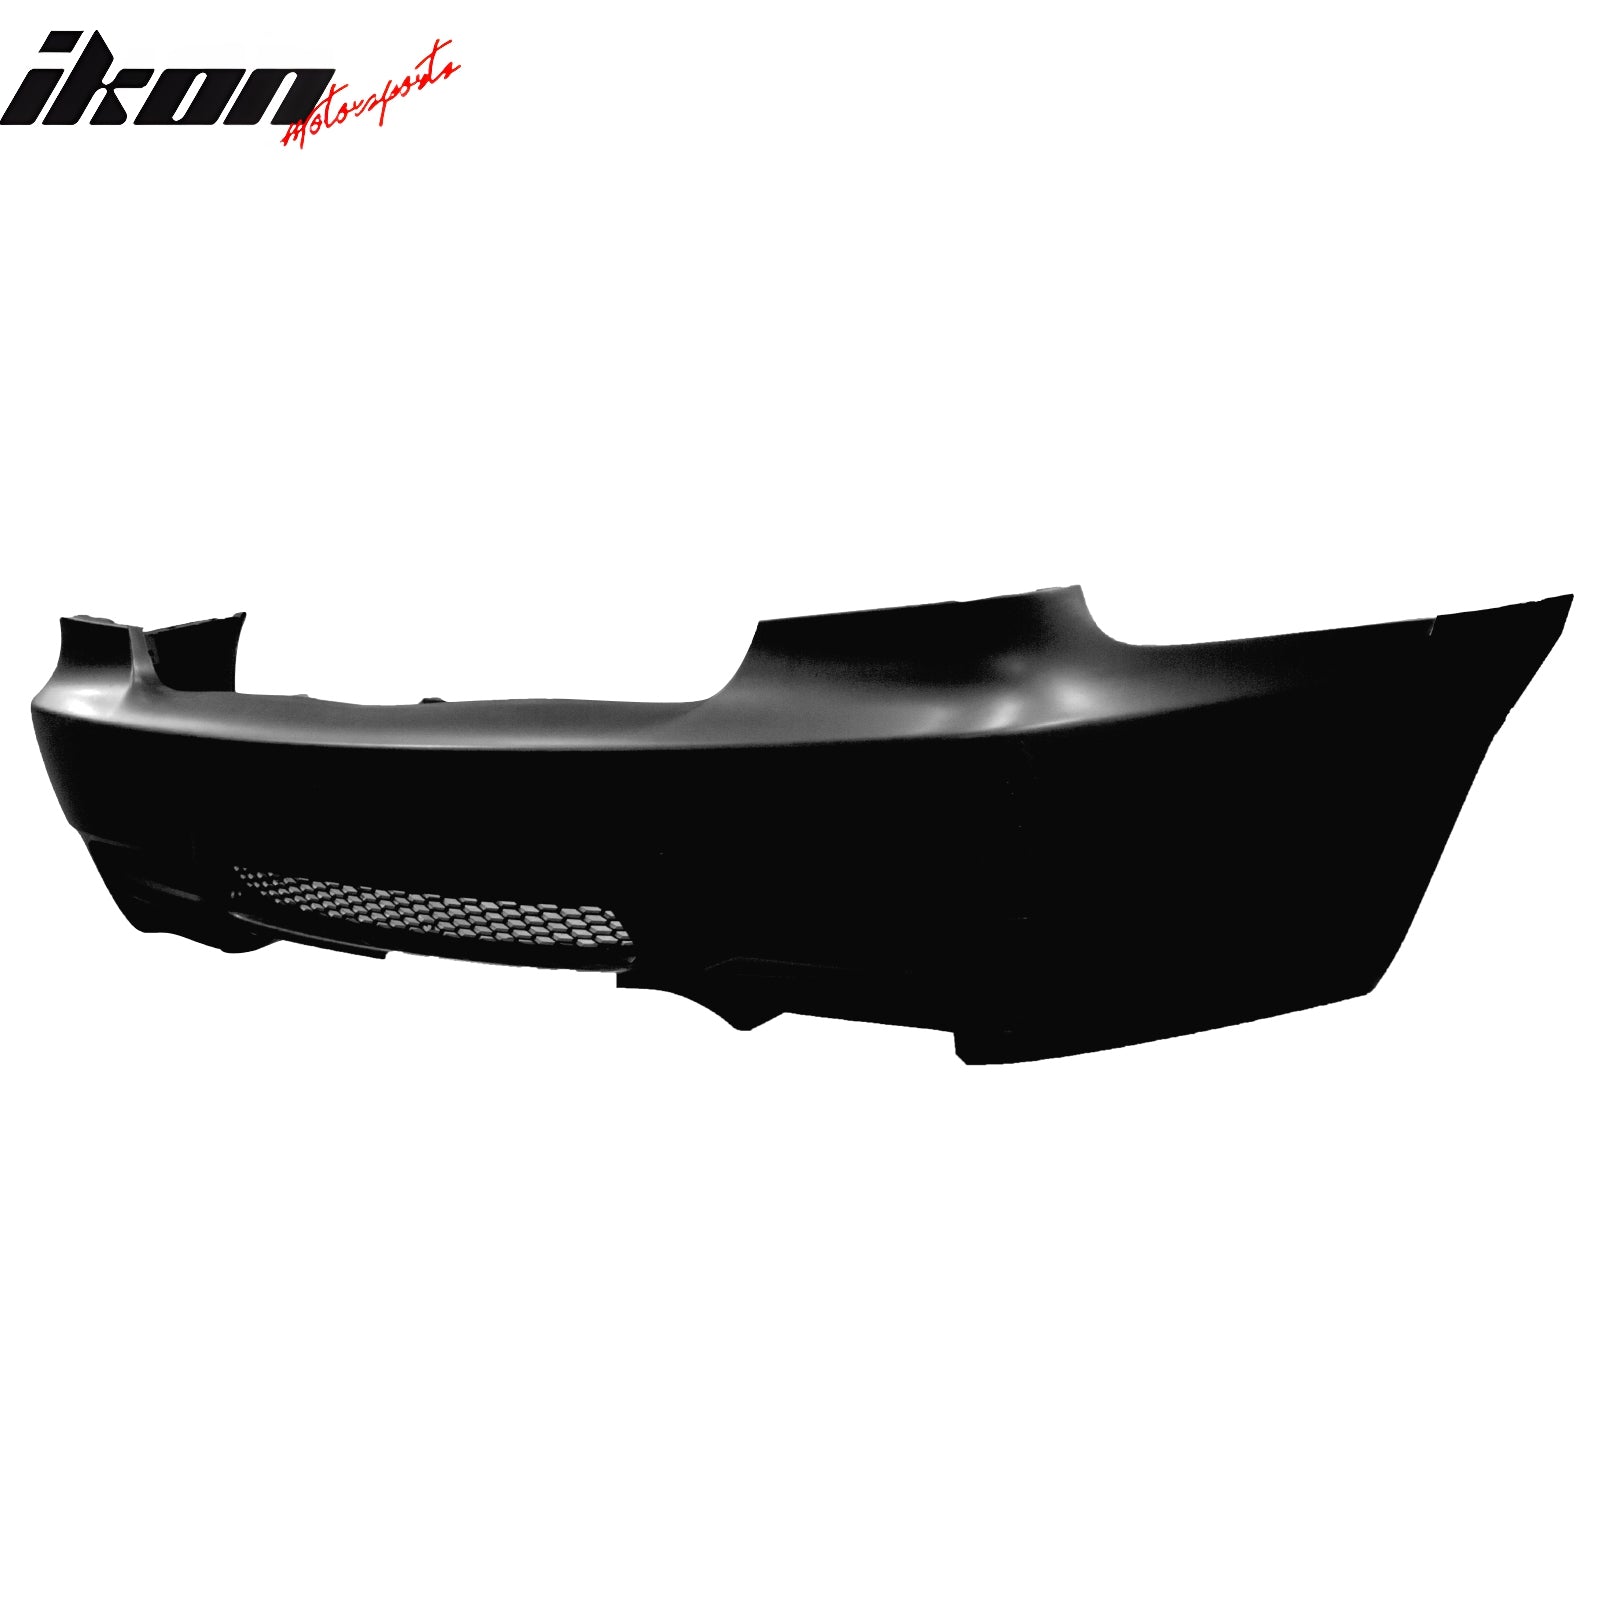 IKON MOTORSPORTS, Rear Bumper Cover Compatible With 2007-2010 BMW E92 3-Series 2-Door Coupe, Unpainted PP M3 Style Bumper Conversion Guard Protector Bodykit